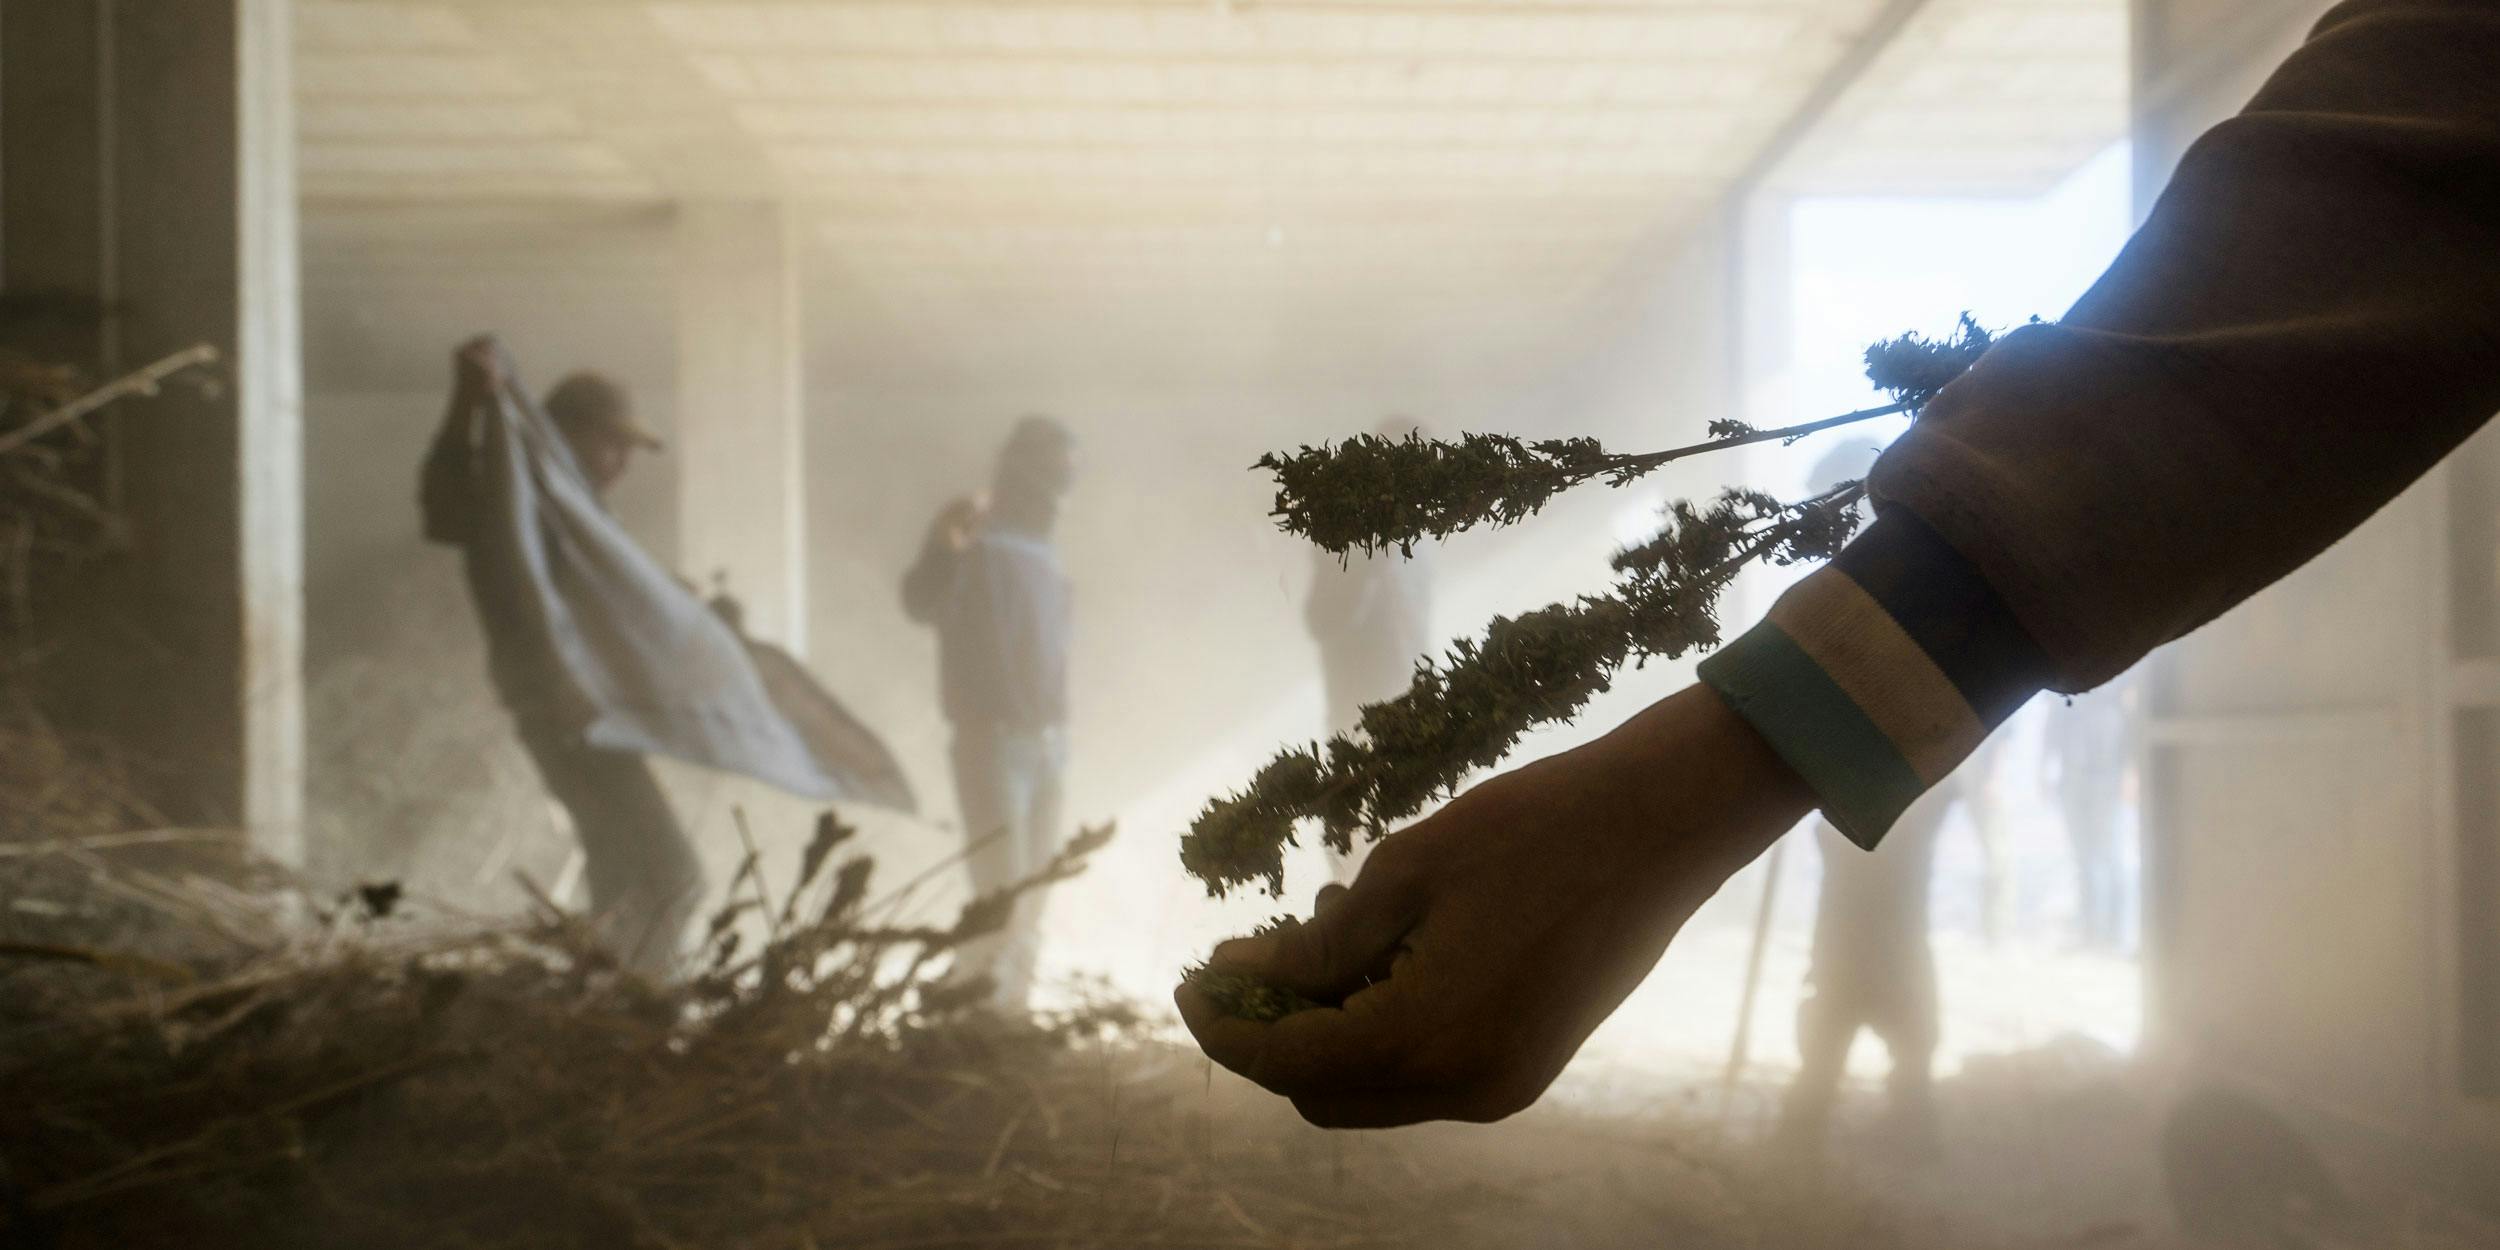 A marijuana processing warehouse in the Beqaa Valley in eastern Lebanon on November 1, 2015. Marijuana is grown openly in many areas of this 75 mile long valley and then processed into hashish in large warehouses during the cold winter months. The Syrian border runs the entire eastern length of the valley which over the the past two years has been a region of extreme tension and skirmishes as ISIS incursions increase into the small Lebanese border villages with most being protected by combined Hezbollah and Lebanese Army forces. Despite the massive military presence, the valley has always been one of the most fertile strips of land in the entire Middle East helped largely by the successful Litani hydroelectricity project that was completed in 1967 creating a web of canals that irrigate much of the valley. (Photo by Giles Clarke/Getty Images)